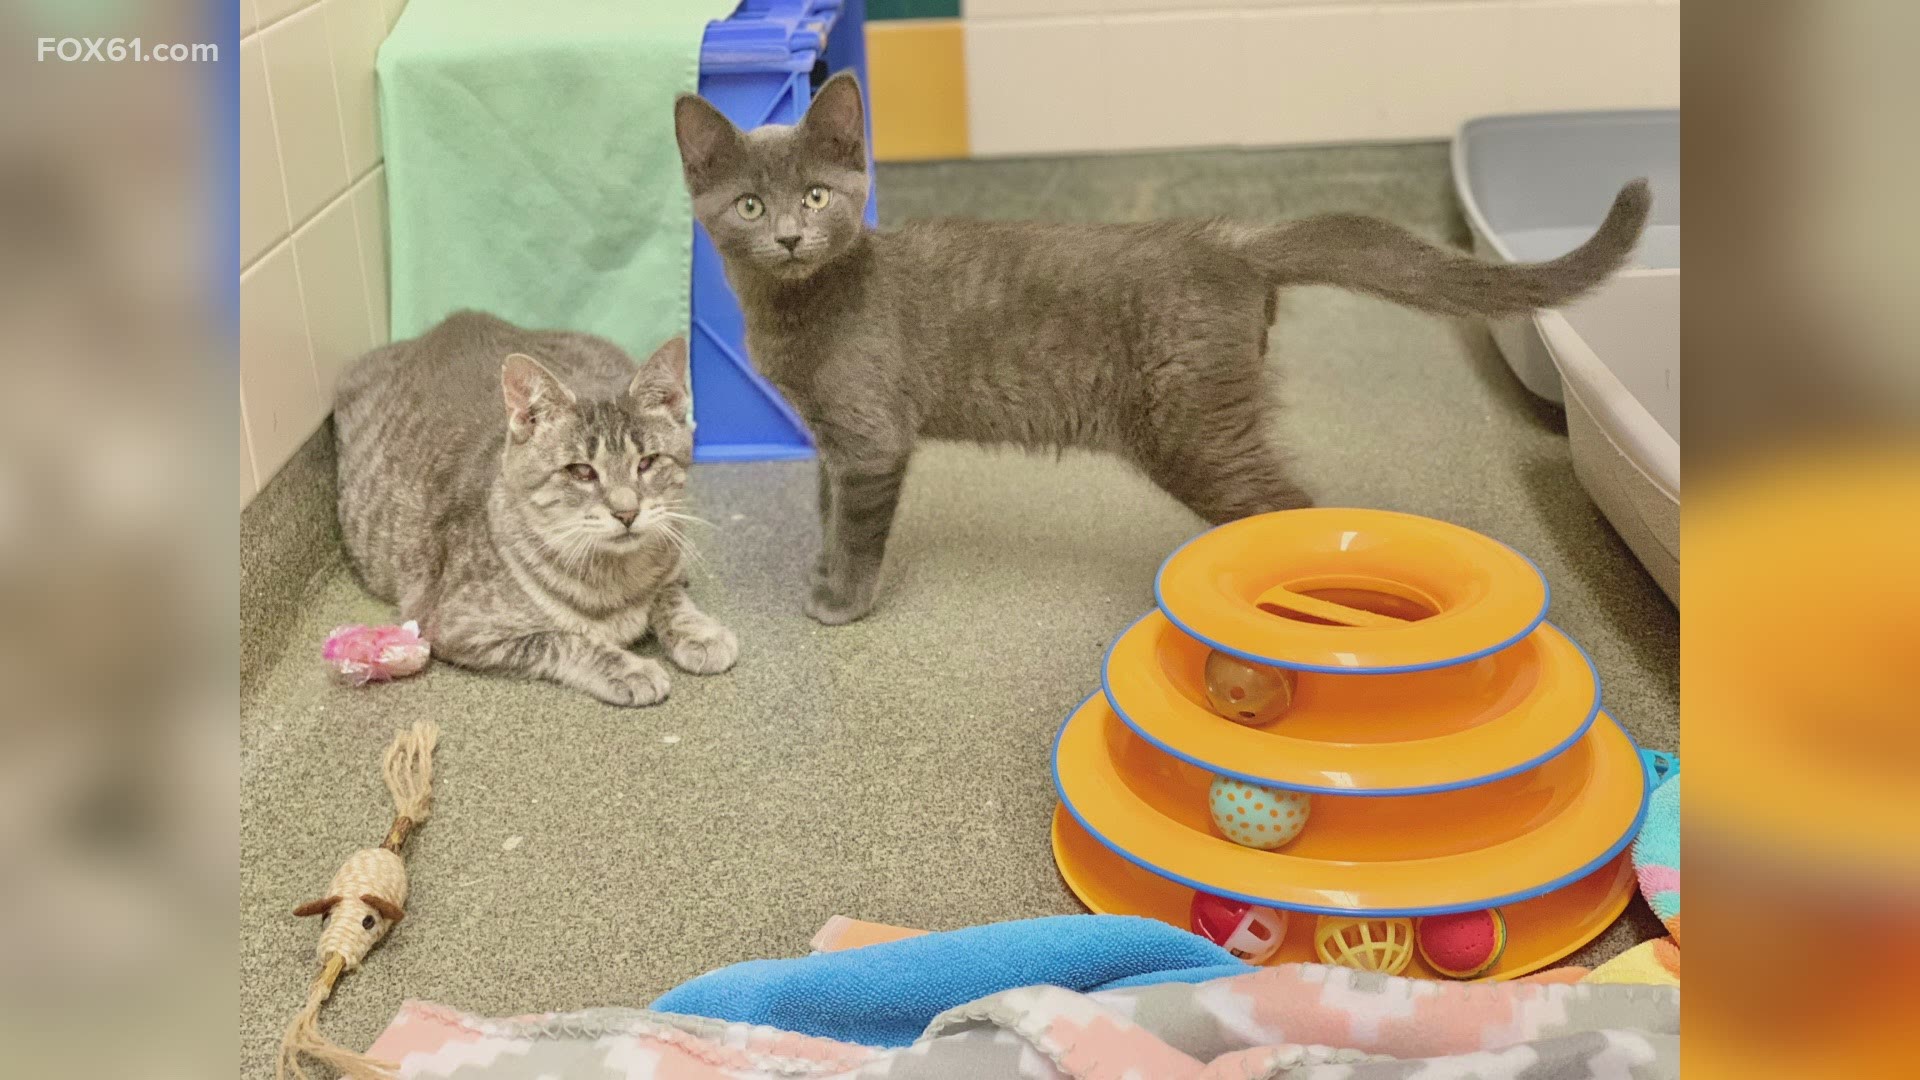 The mother and son pair were rescued from a hoarding situation. Officials at the CT Humane Society are searching for a forever home that will keep them together.